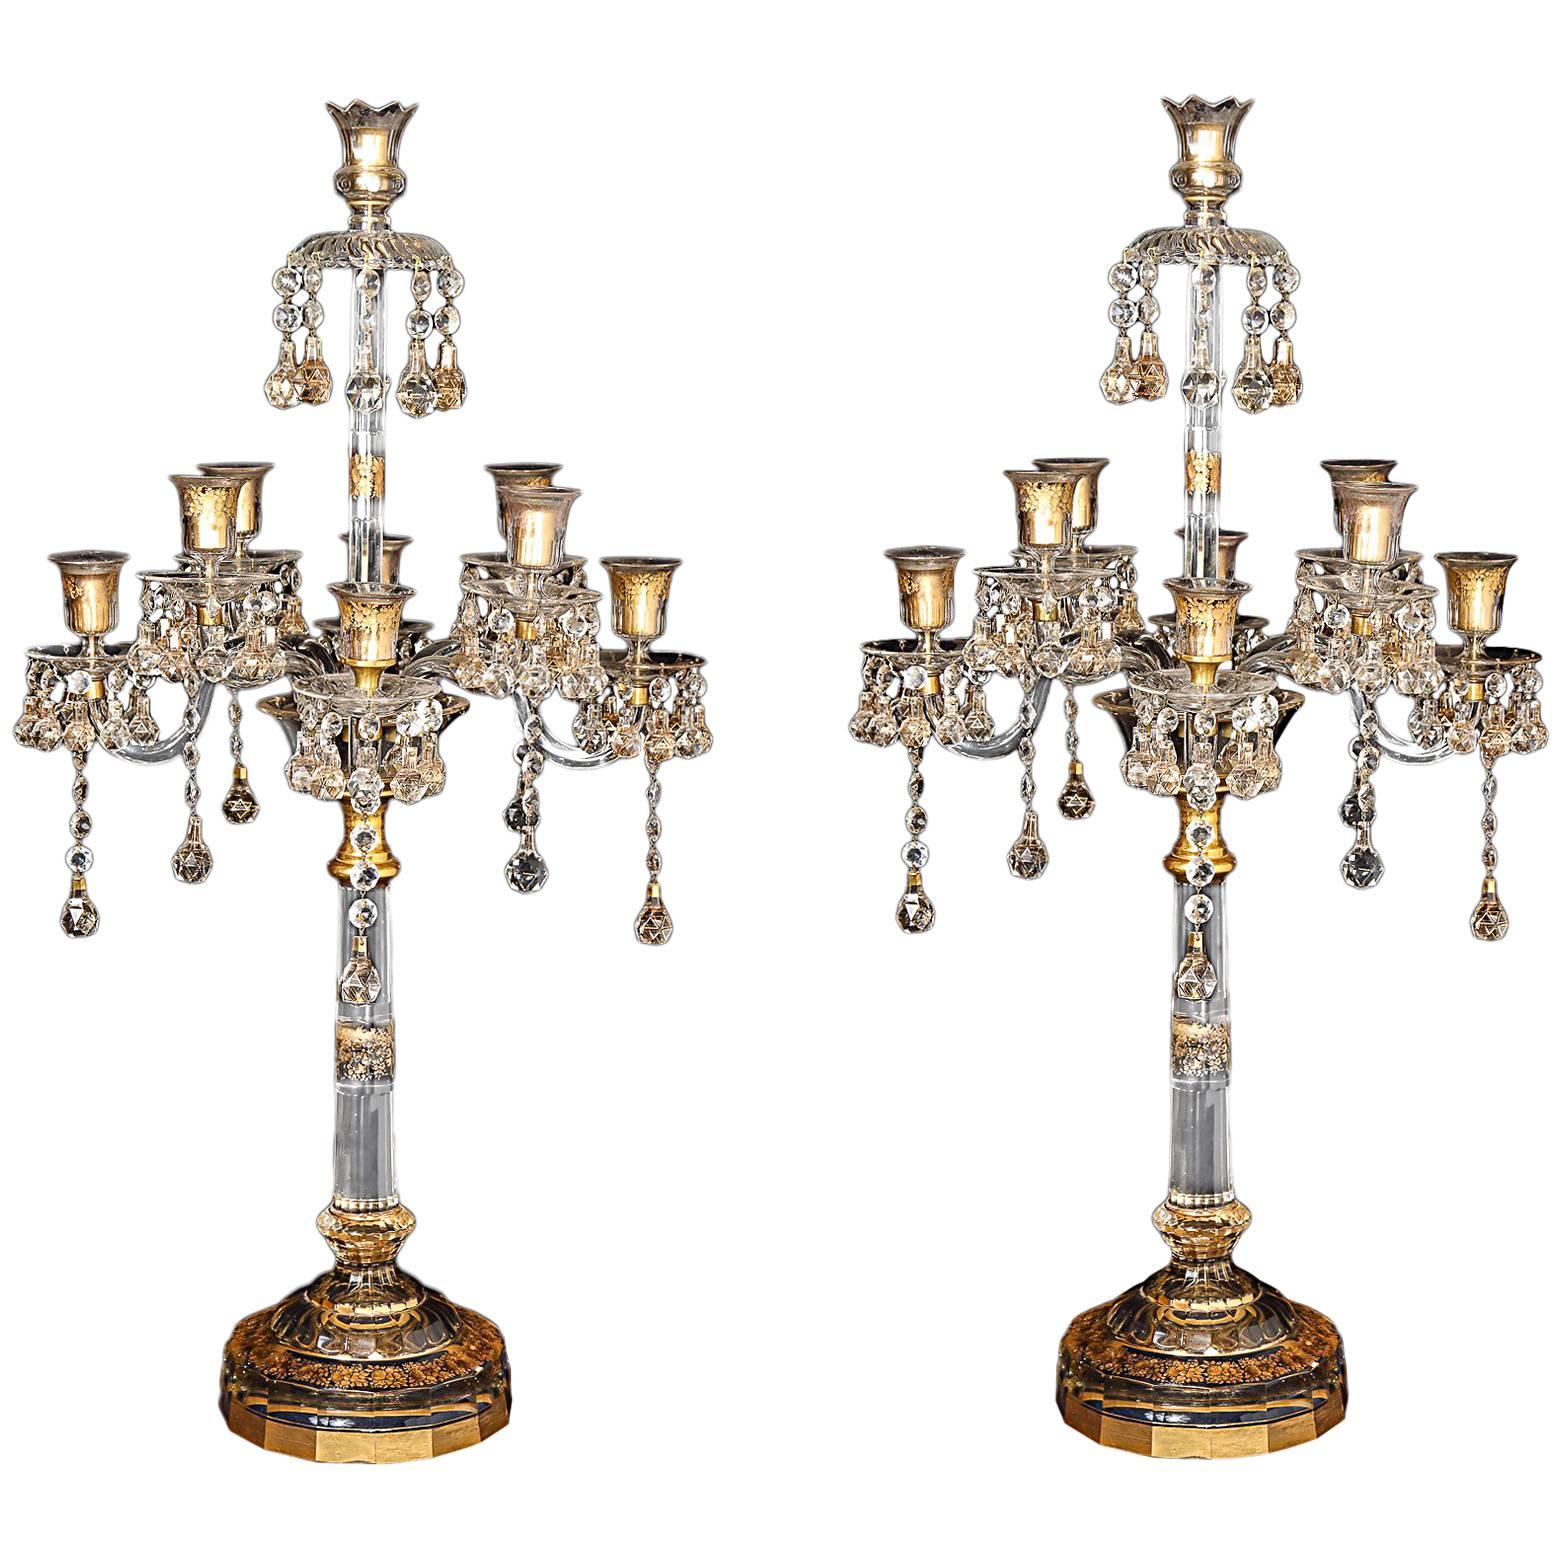 Pair of French Antique Louis XVI Style Crystal Candelabras Baccarat Attributed